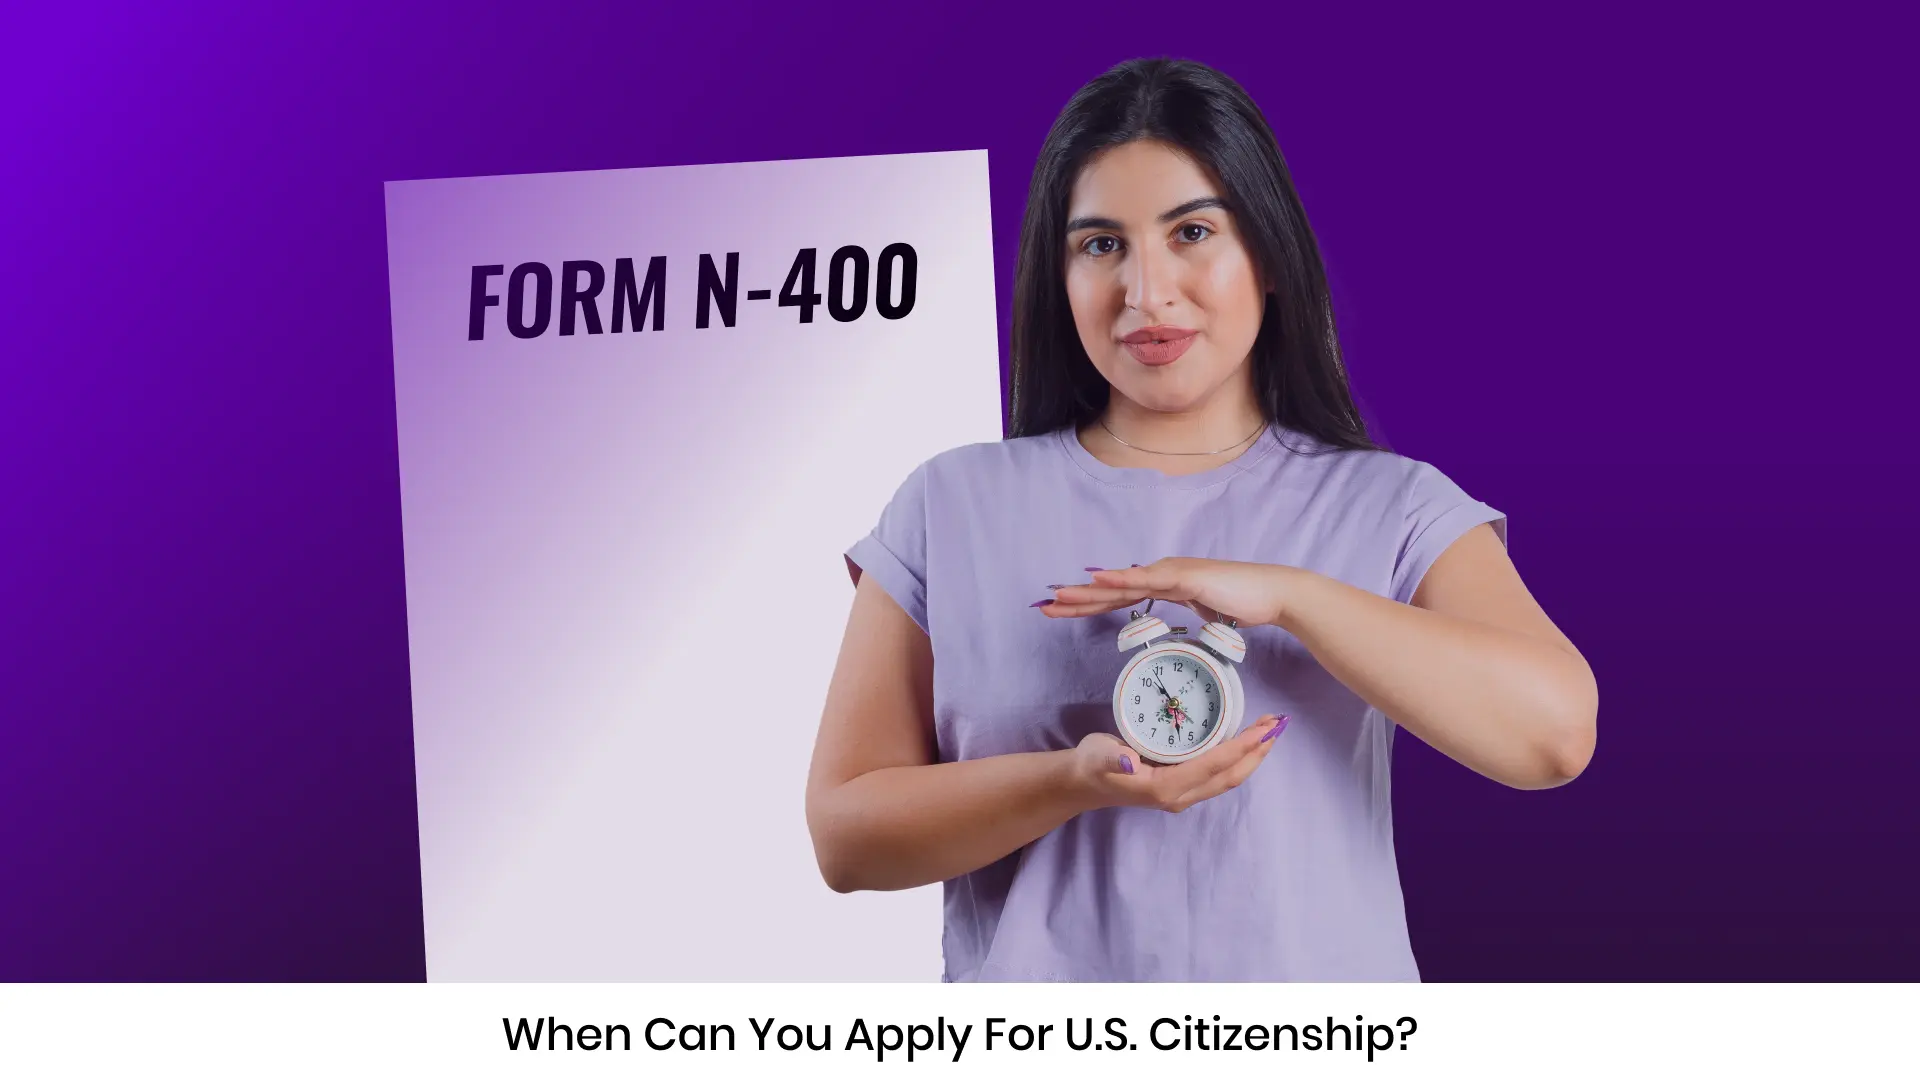 When Can You Apply for U.S. Citizenship?